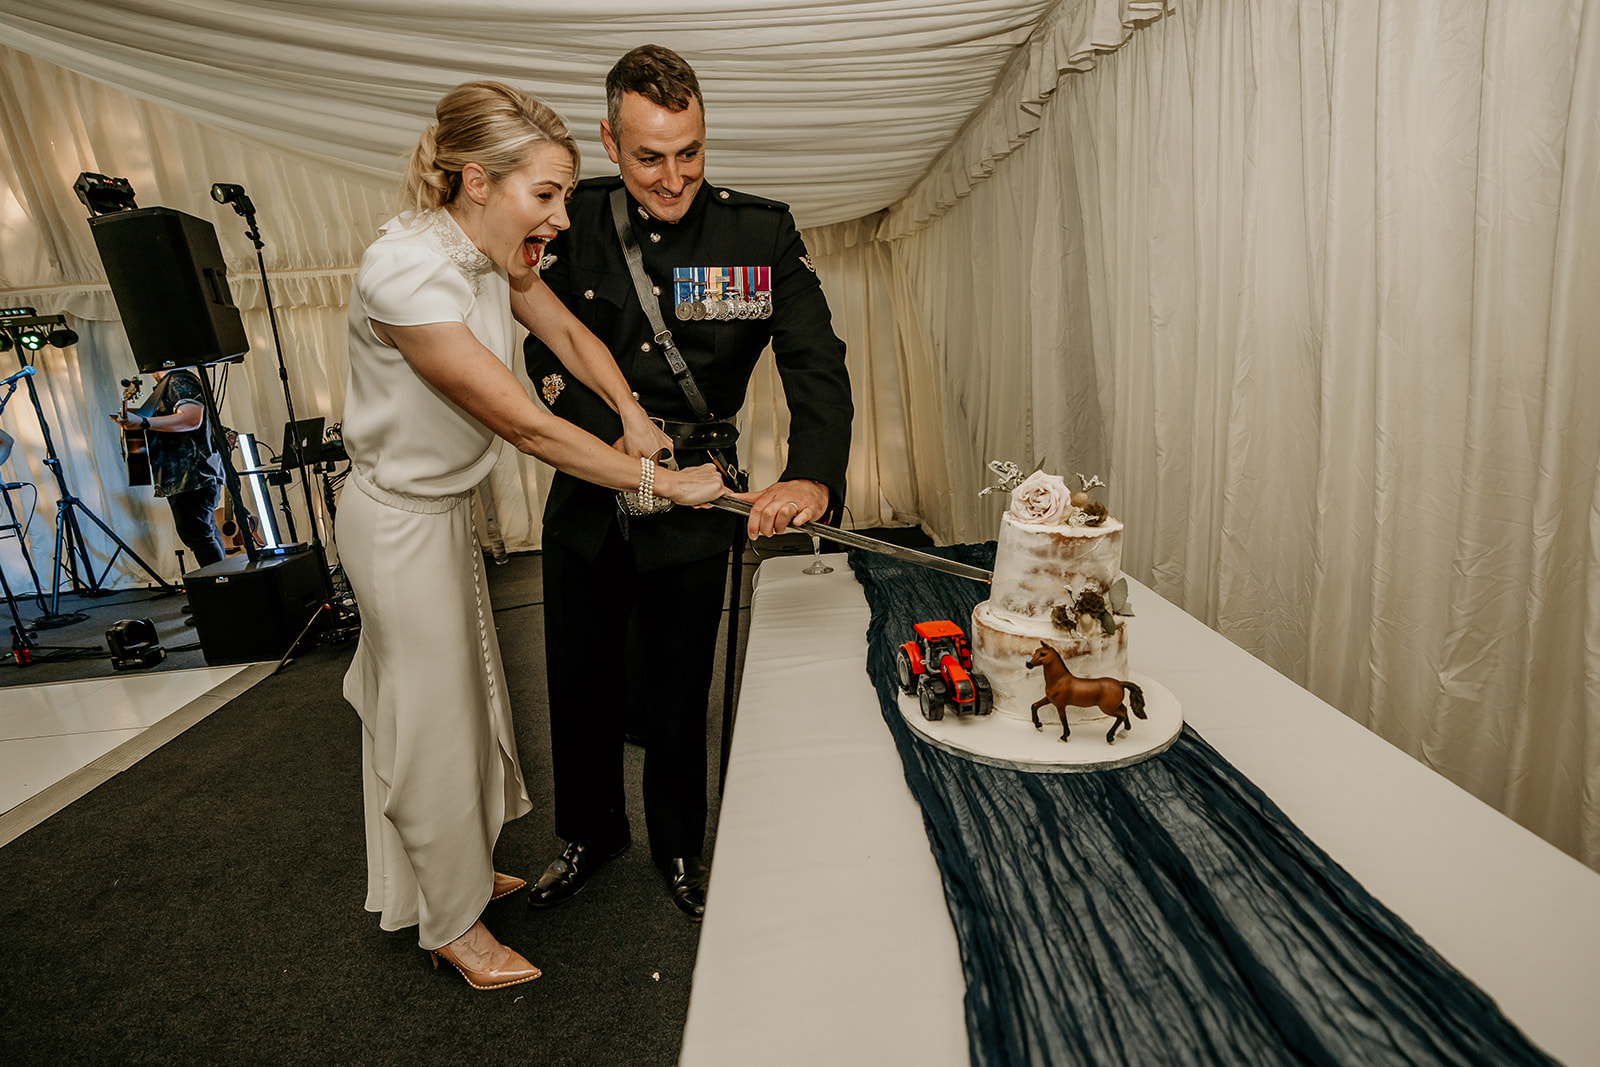 cutting the cake with ceremonial sword